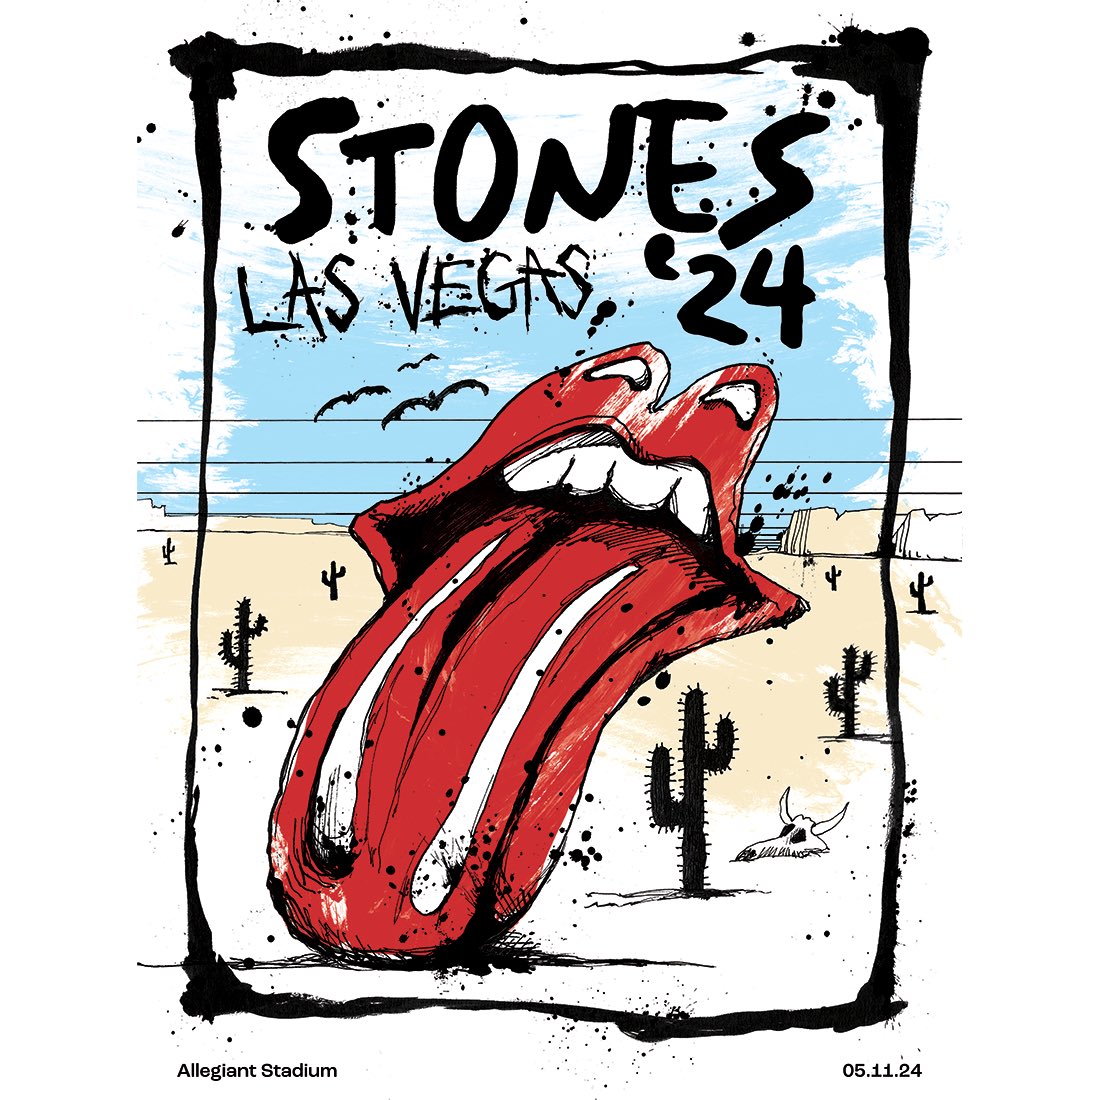 The Rolling Stones are set to play Allegiant Stadium in Las Vegas this Saturday! Ticket holders will be sent a link to vote for a song to add to the setlist, so check your emails! If you’re in Vegas the merch stand will be open at the venue, tomorrow 12:30pm-8pm at Parking Lot…